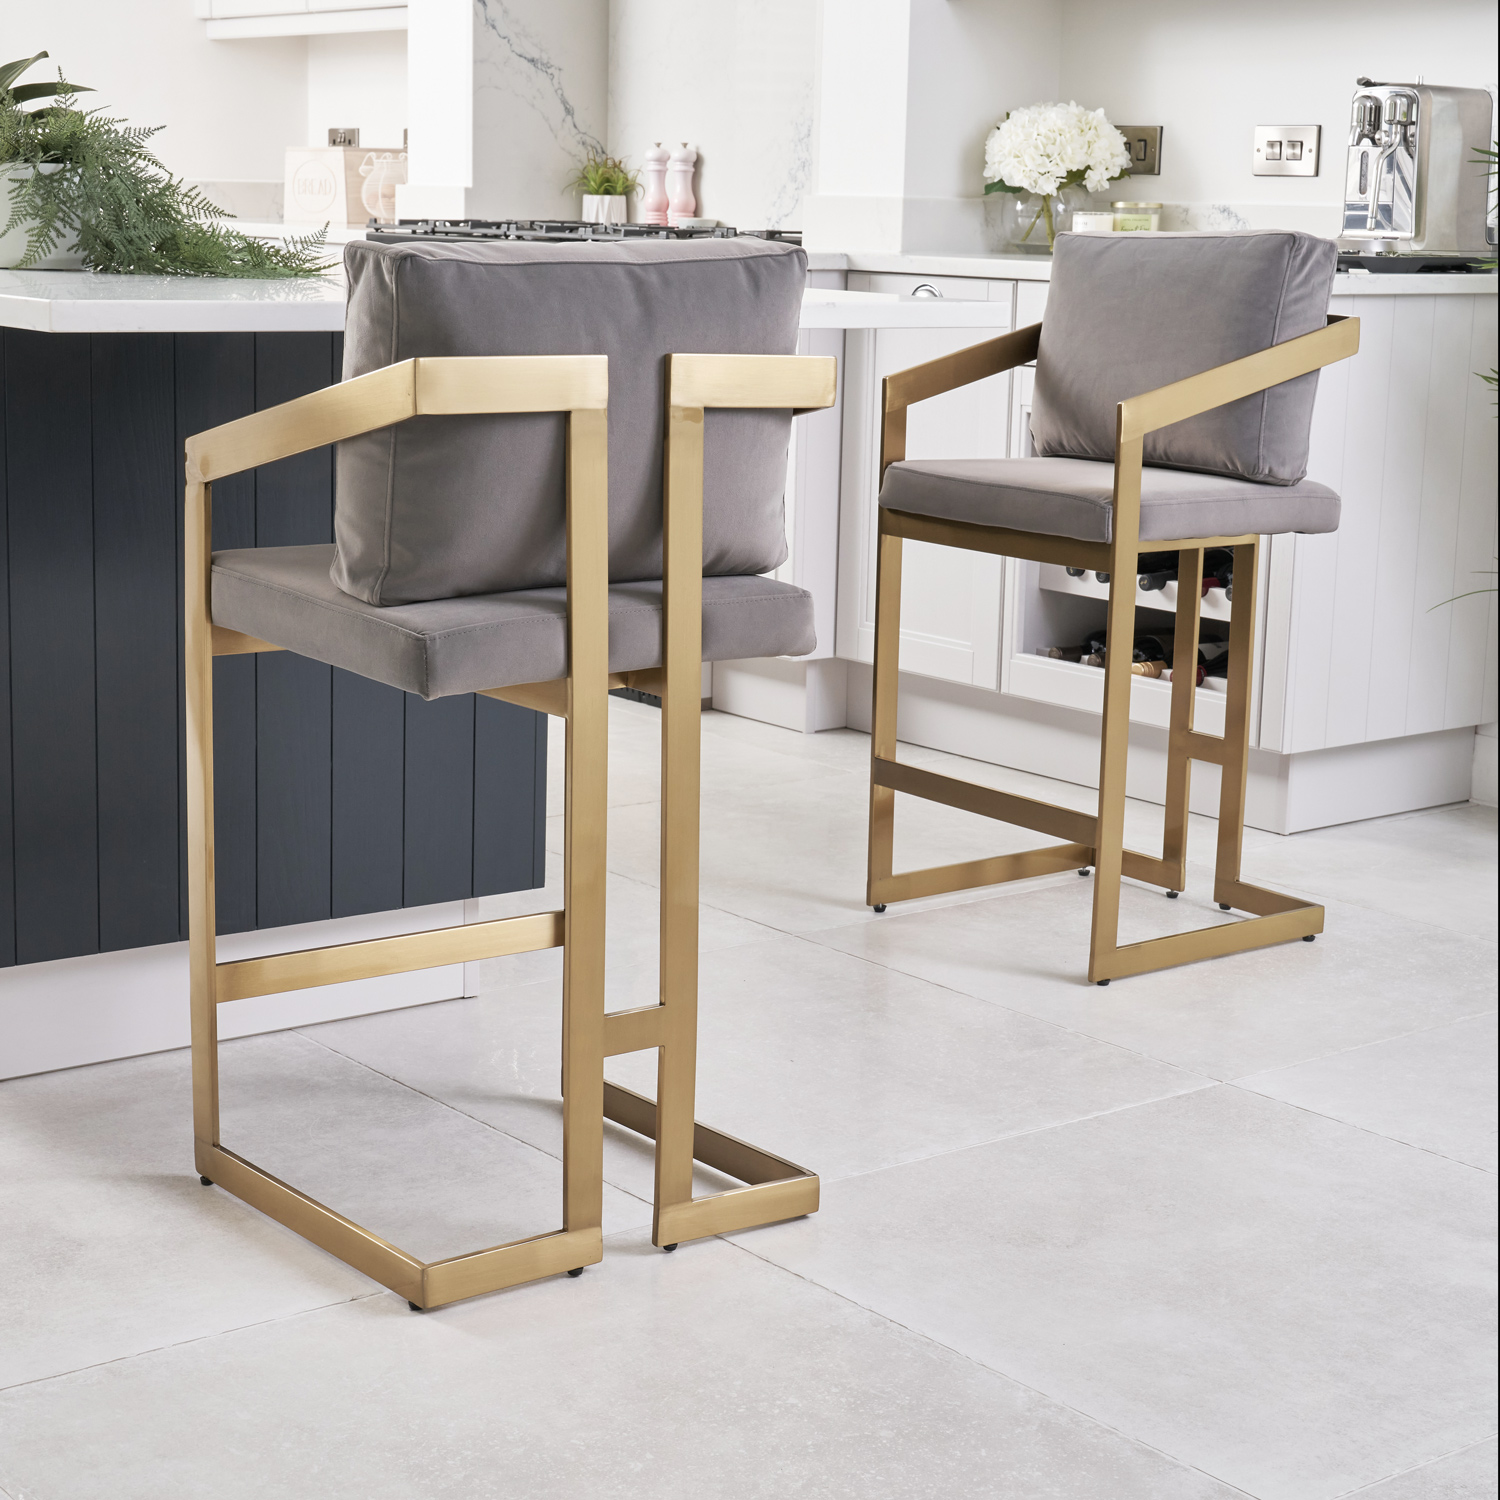 Alexandra Grey Velvet Kitchen Stool with a Gold Stainless Steel Frame